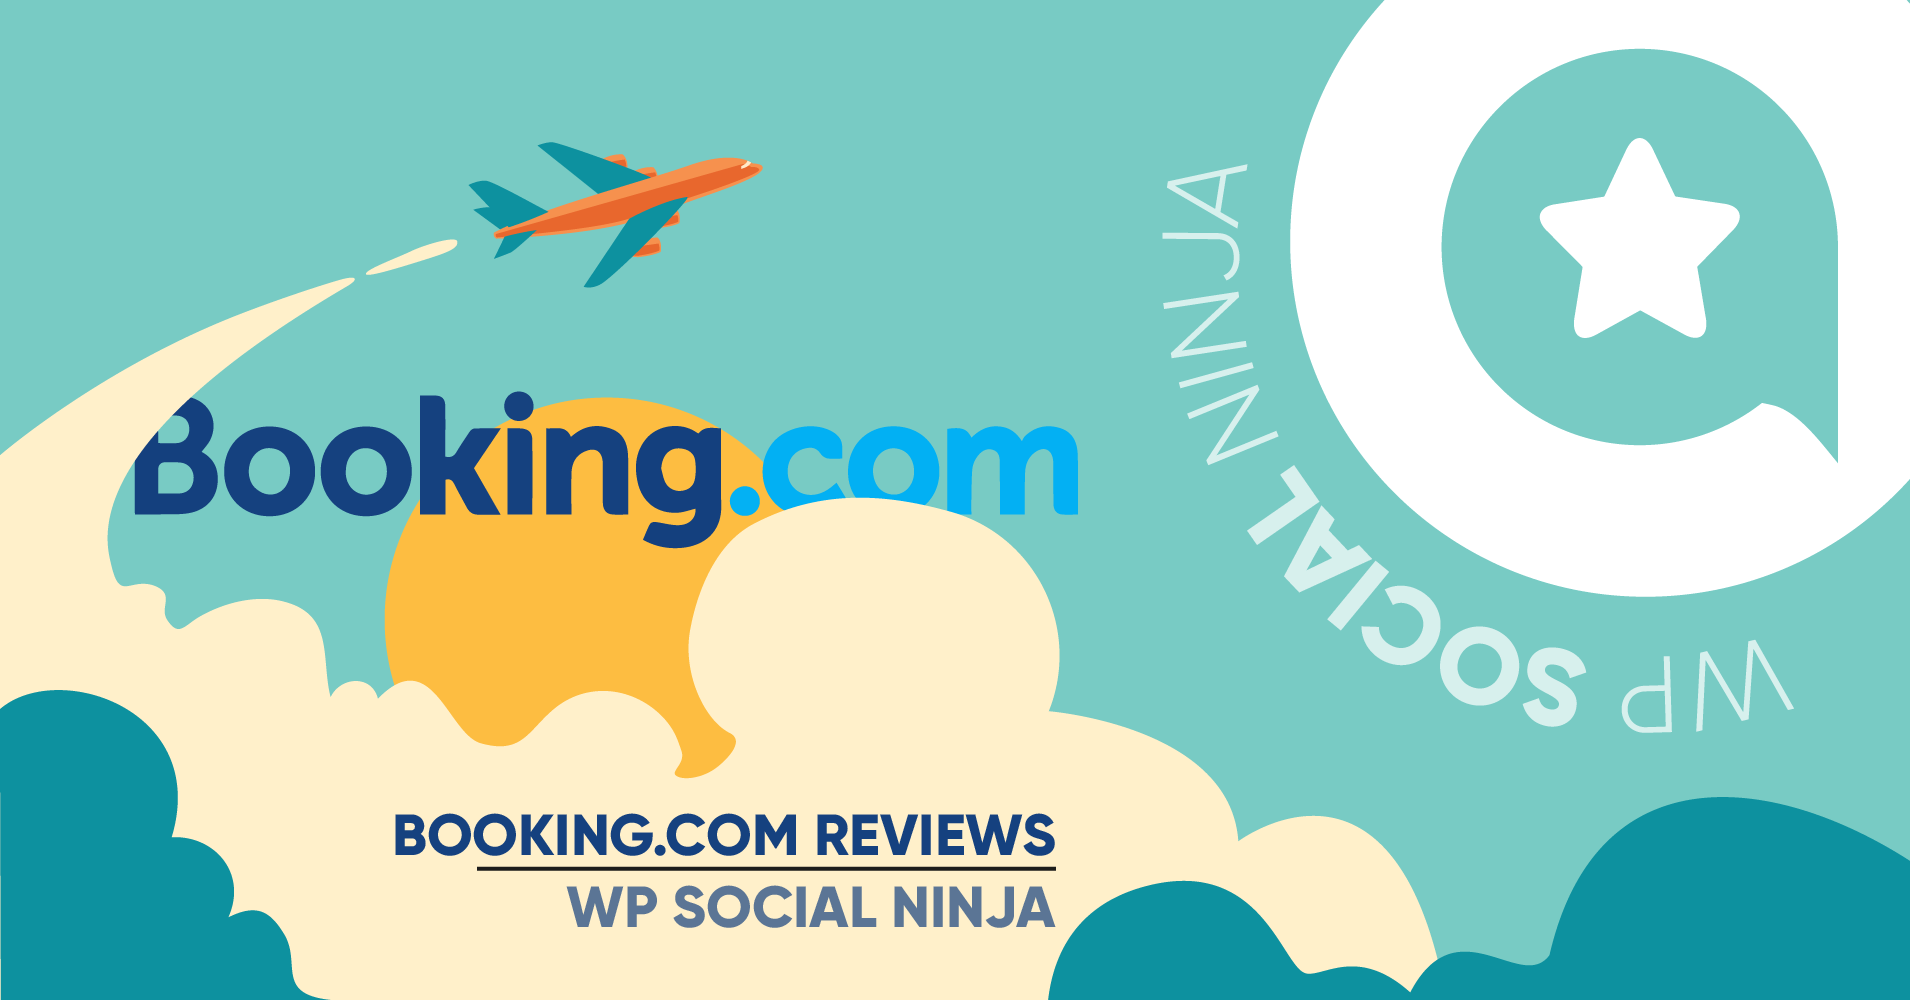 How to Add Booking.com Reviews to Your Website (Easiest Way)